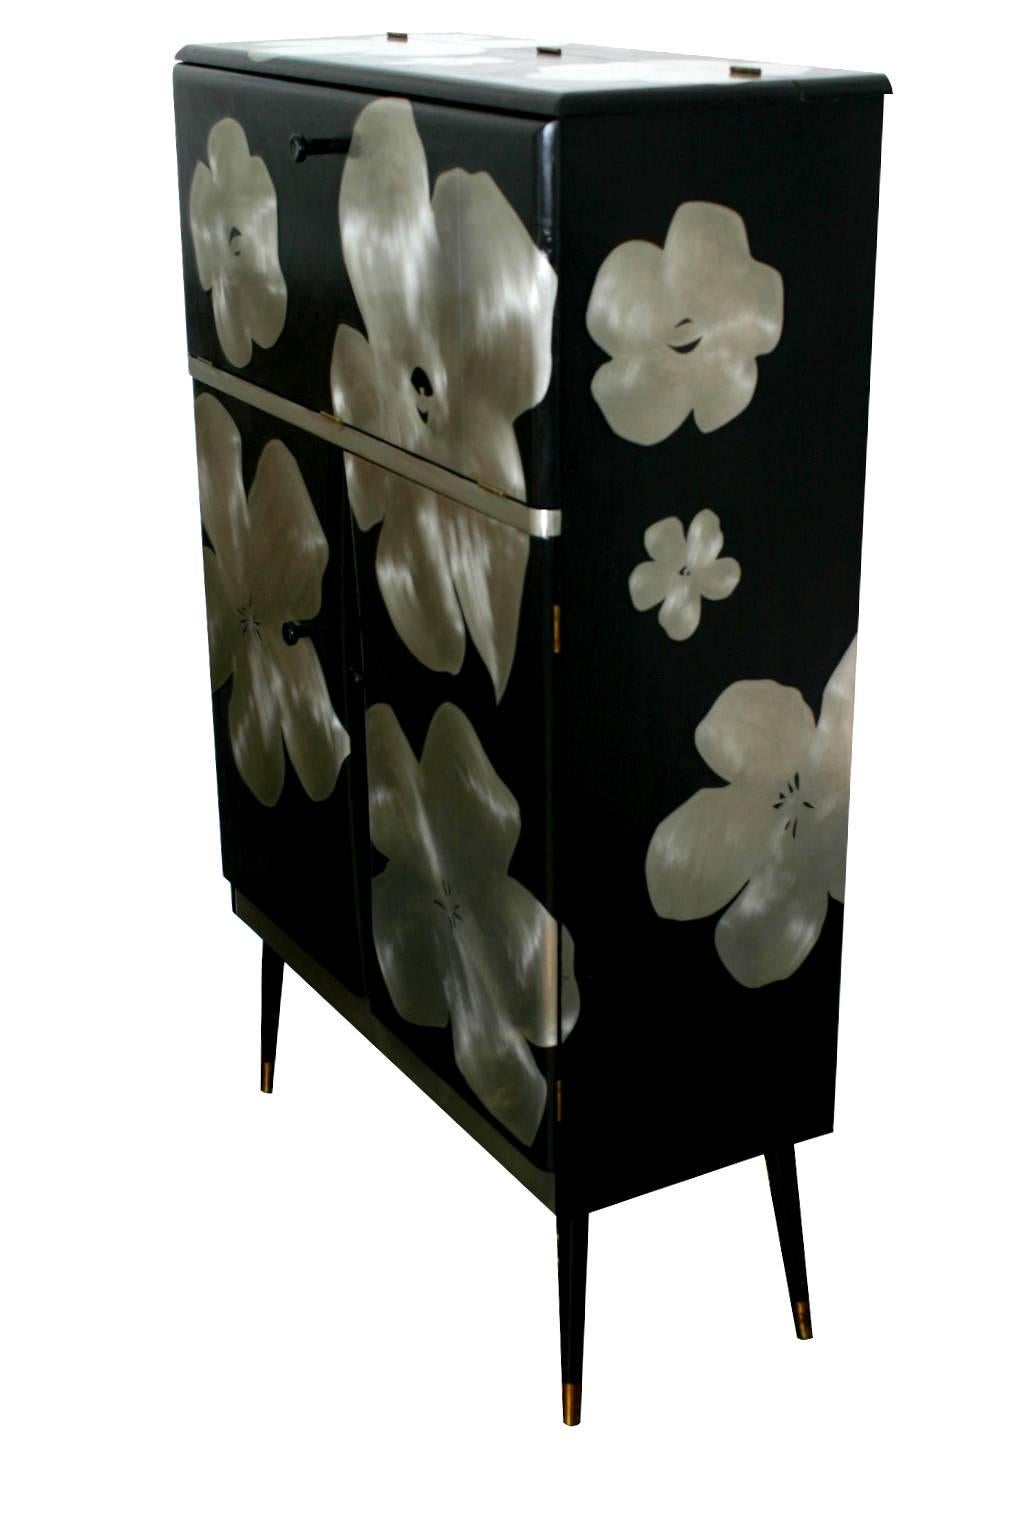 Sheet metal inlaid with gesso on a 20th century cocktail cabinet, with light. All Kate's pieces are one-offs so there will be slight variations with this cabinet although pieces can be sourced to meet individual requirements.